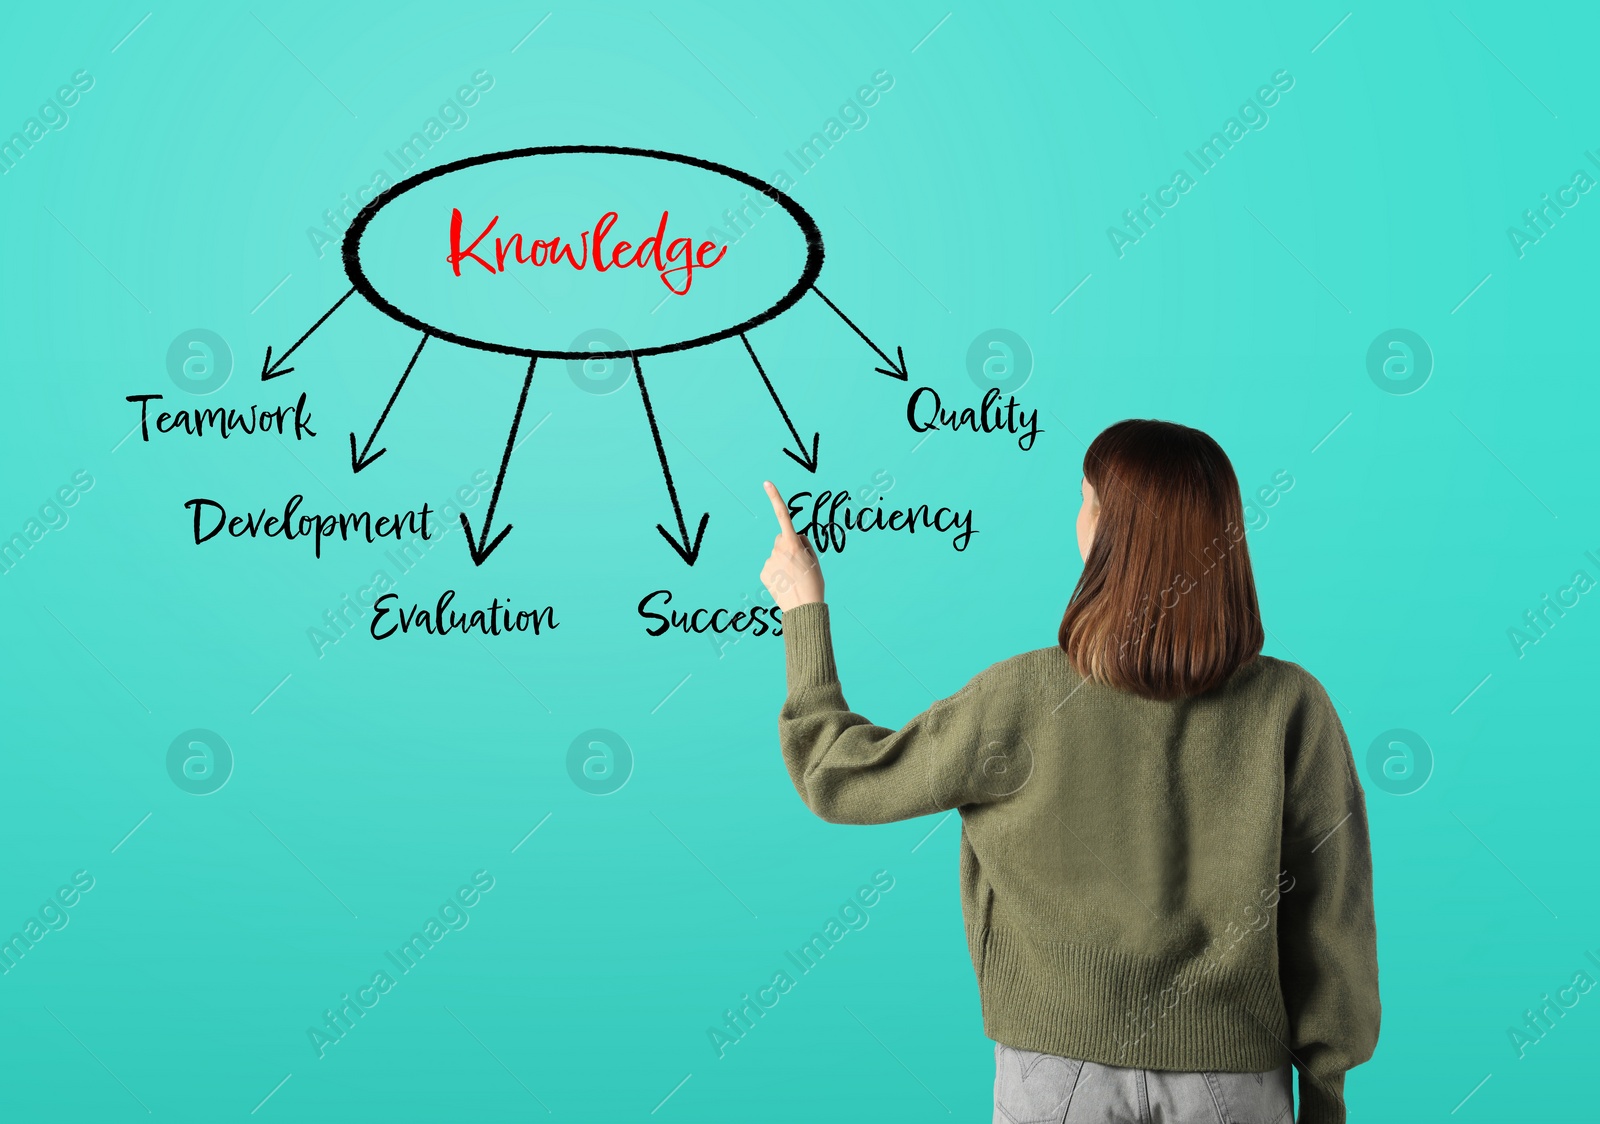 Image of Logic. Woman pointing at diagram on turquoise background, back view